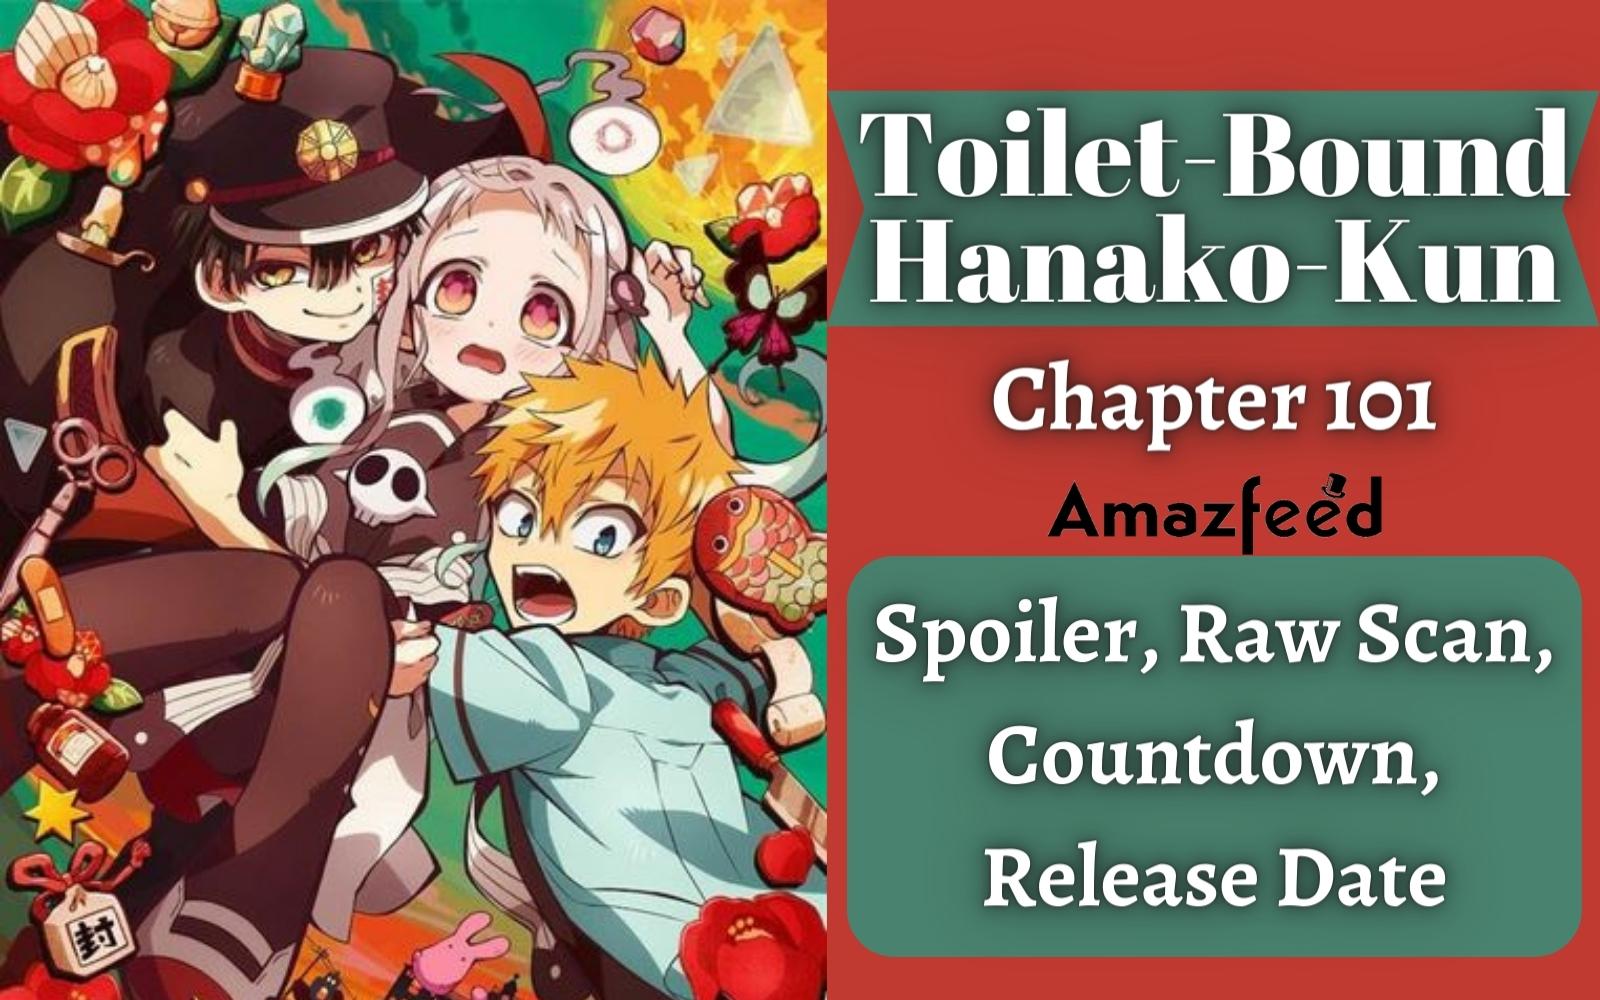 Toilet-Bound Hanako-Kun Chapter 102 Spoiler, Release Date, Raw Scan, Countdown, Color Page